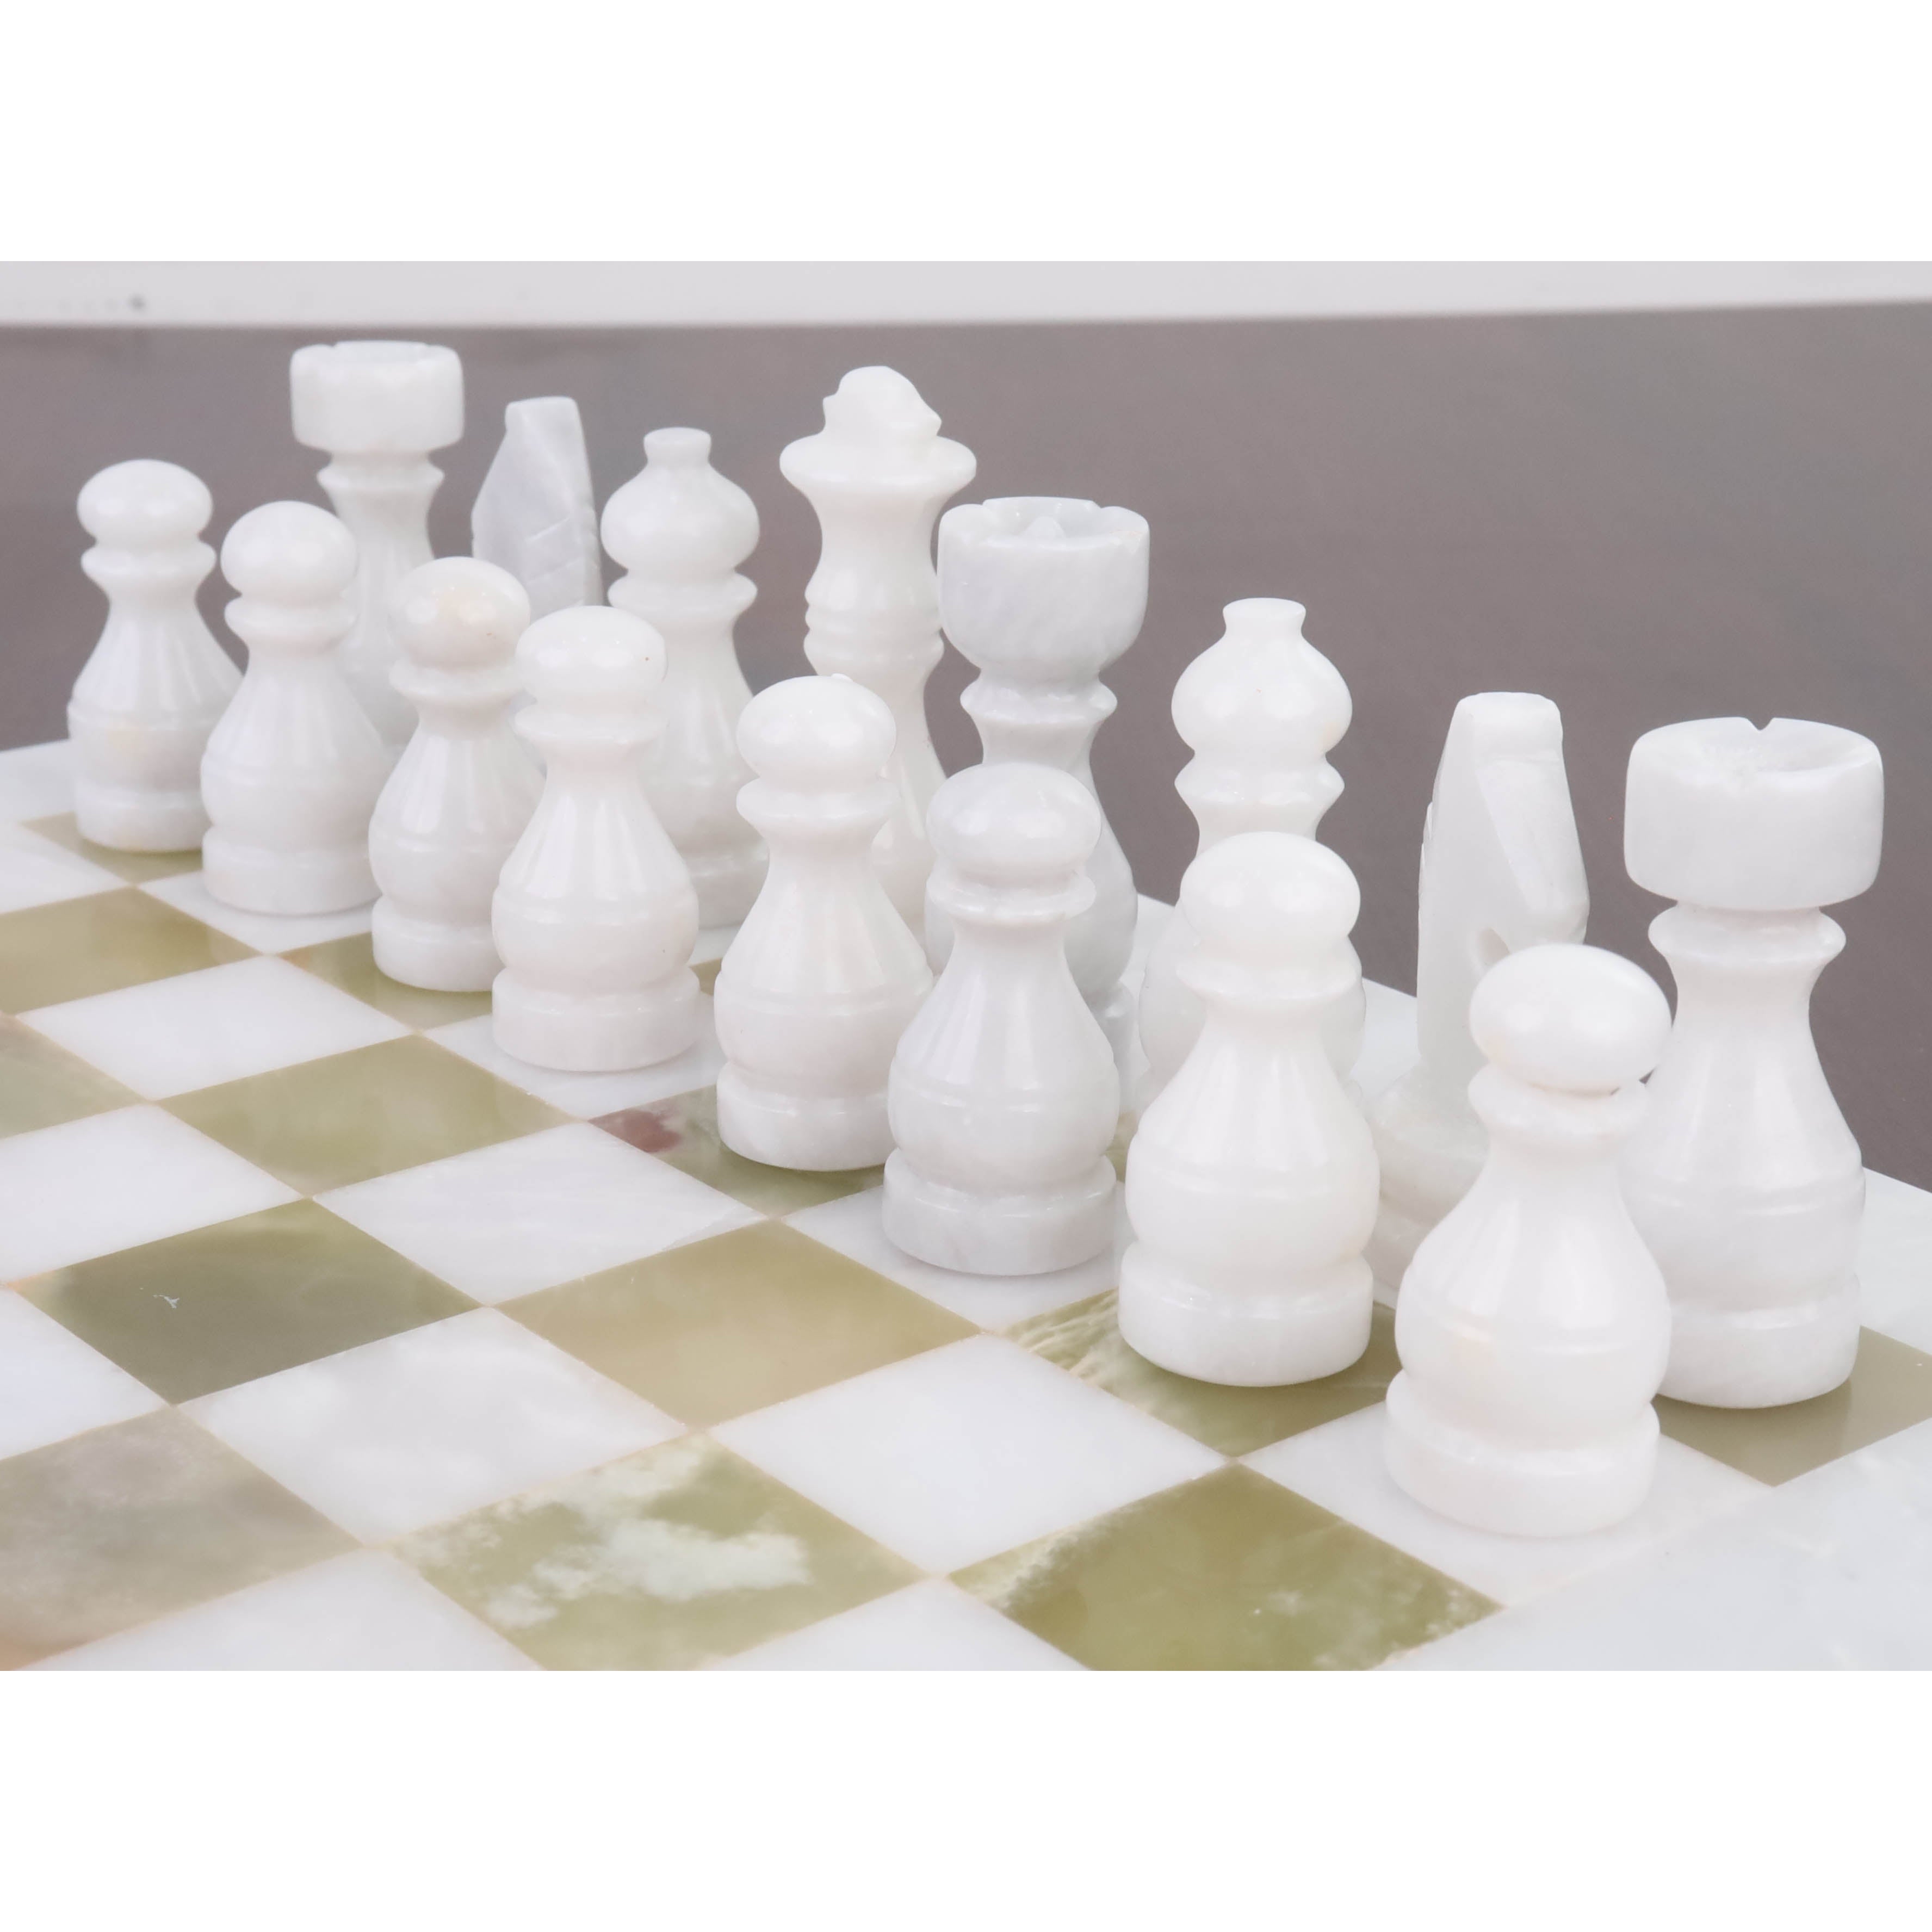 Onyx Marble & Stone Chess Pieces & Board Combo Set - 12" - Handcrafted Chess Set